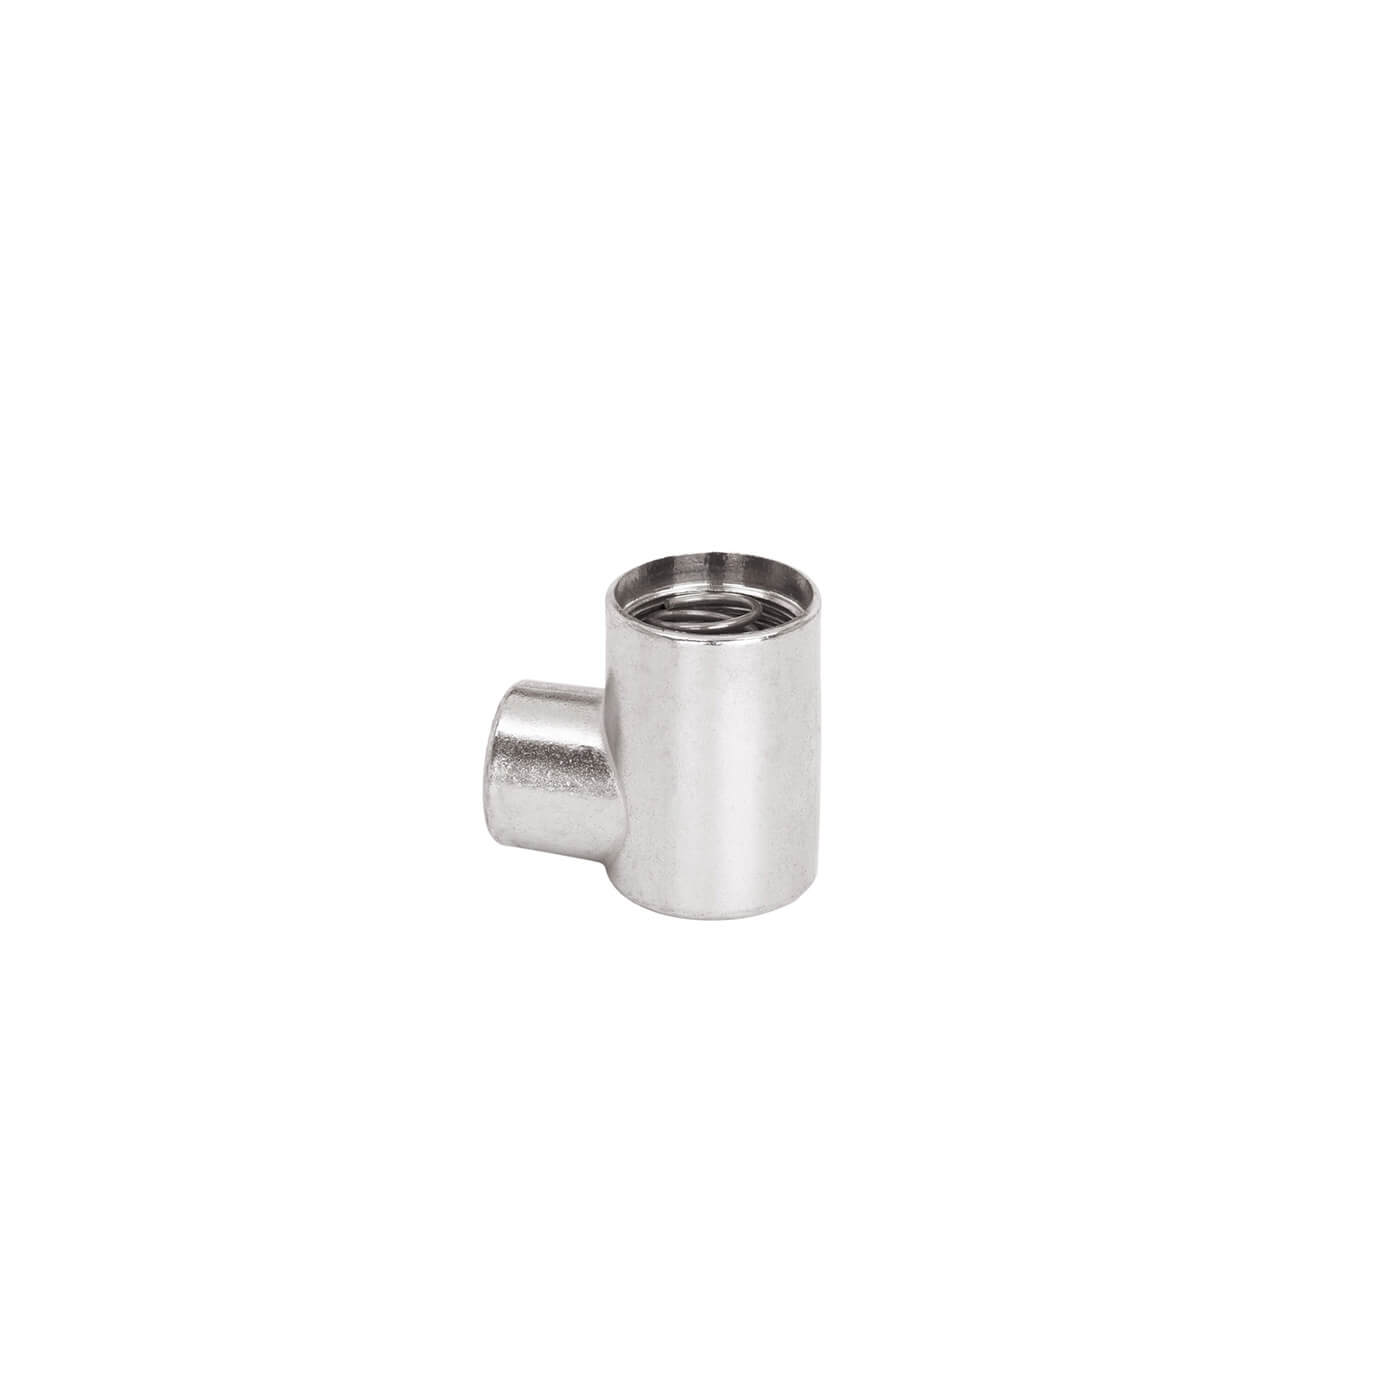 1/2” NPT 90° Elbow Inlet l Aquor Water Systems